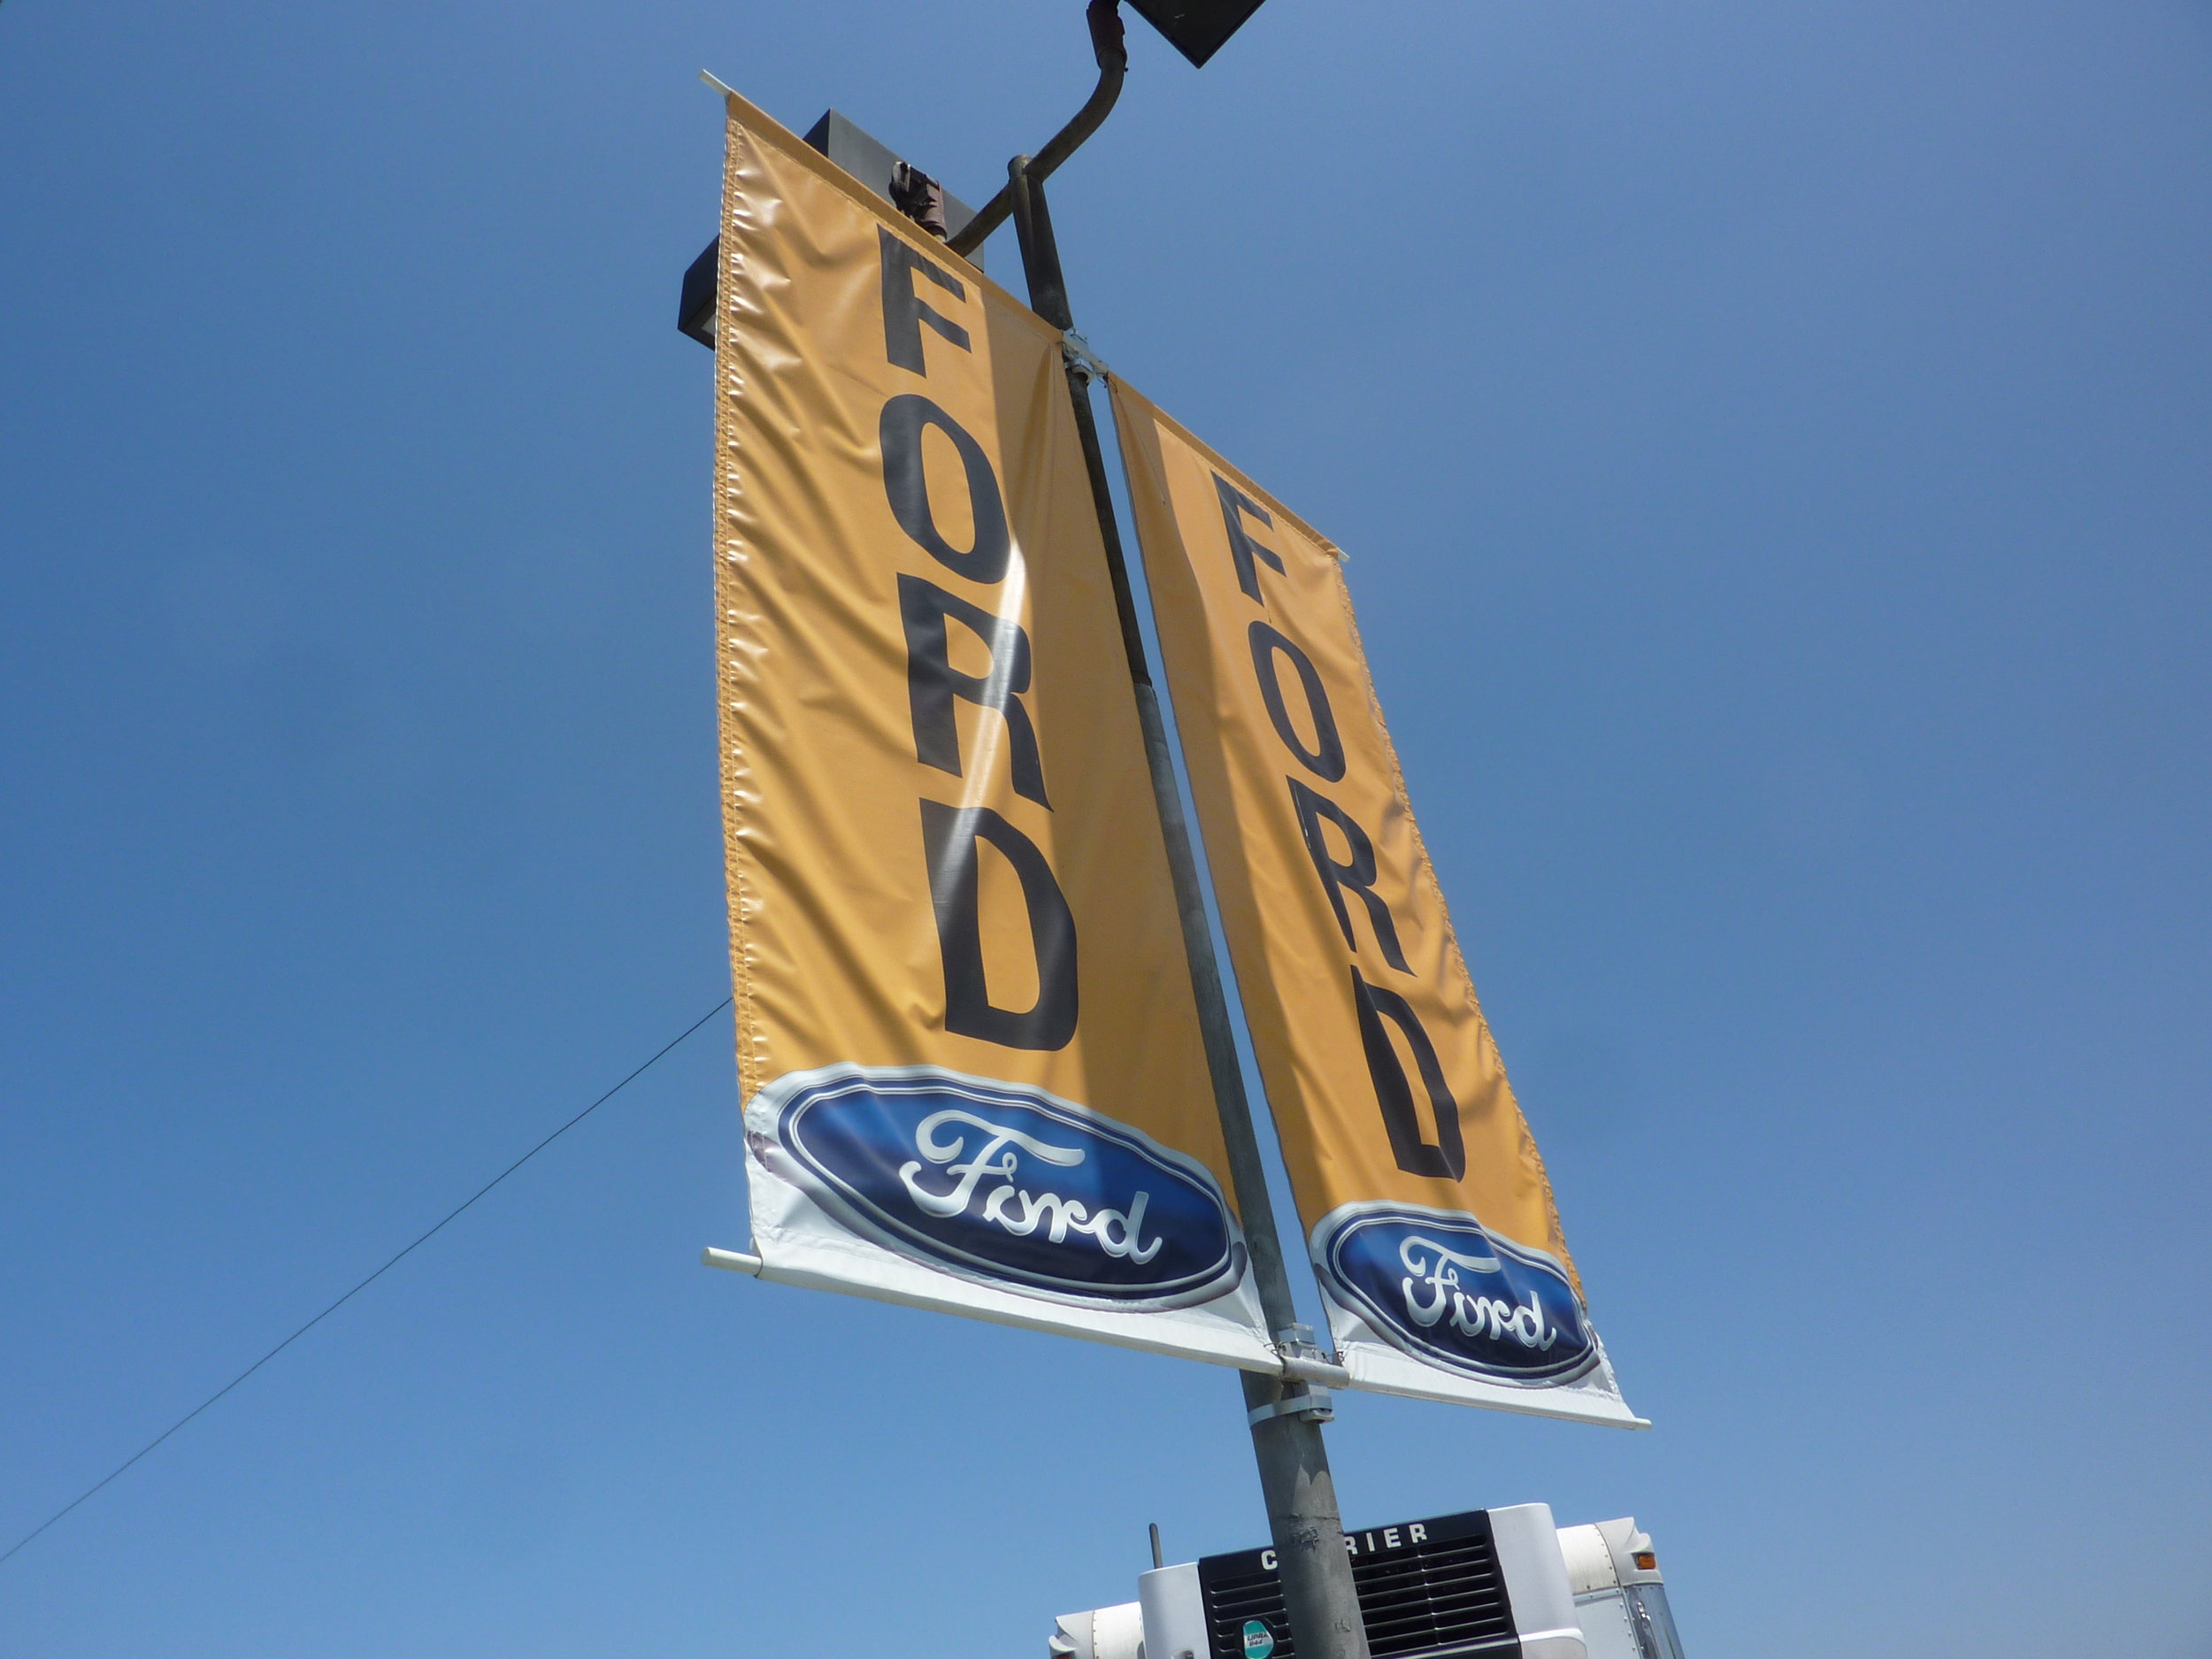 Ford pole display banners